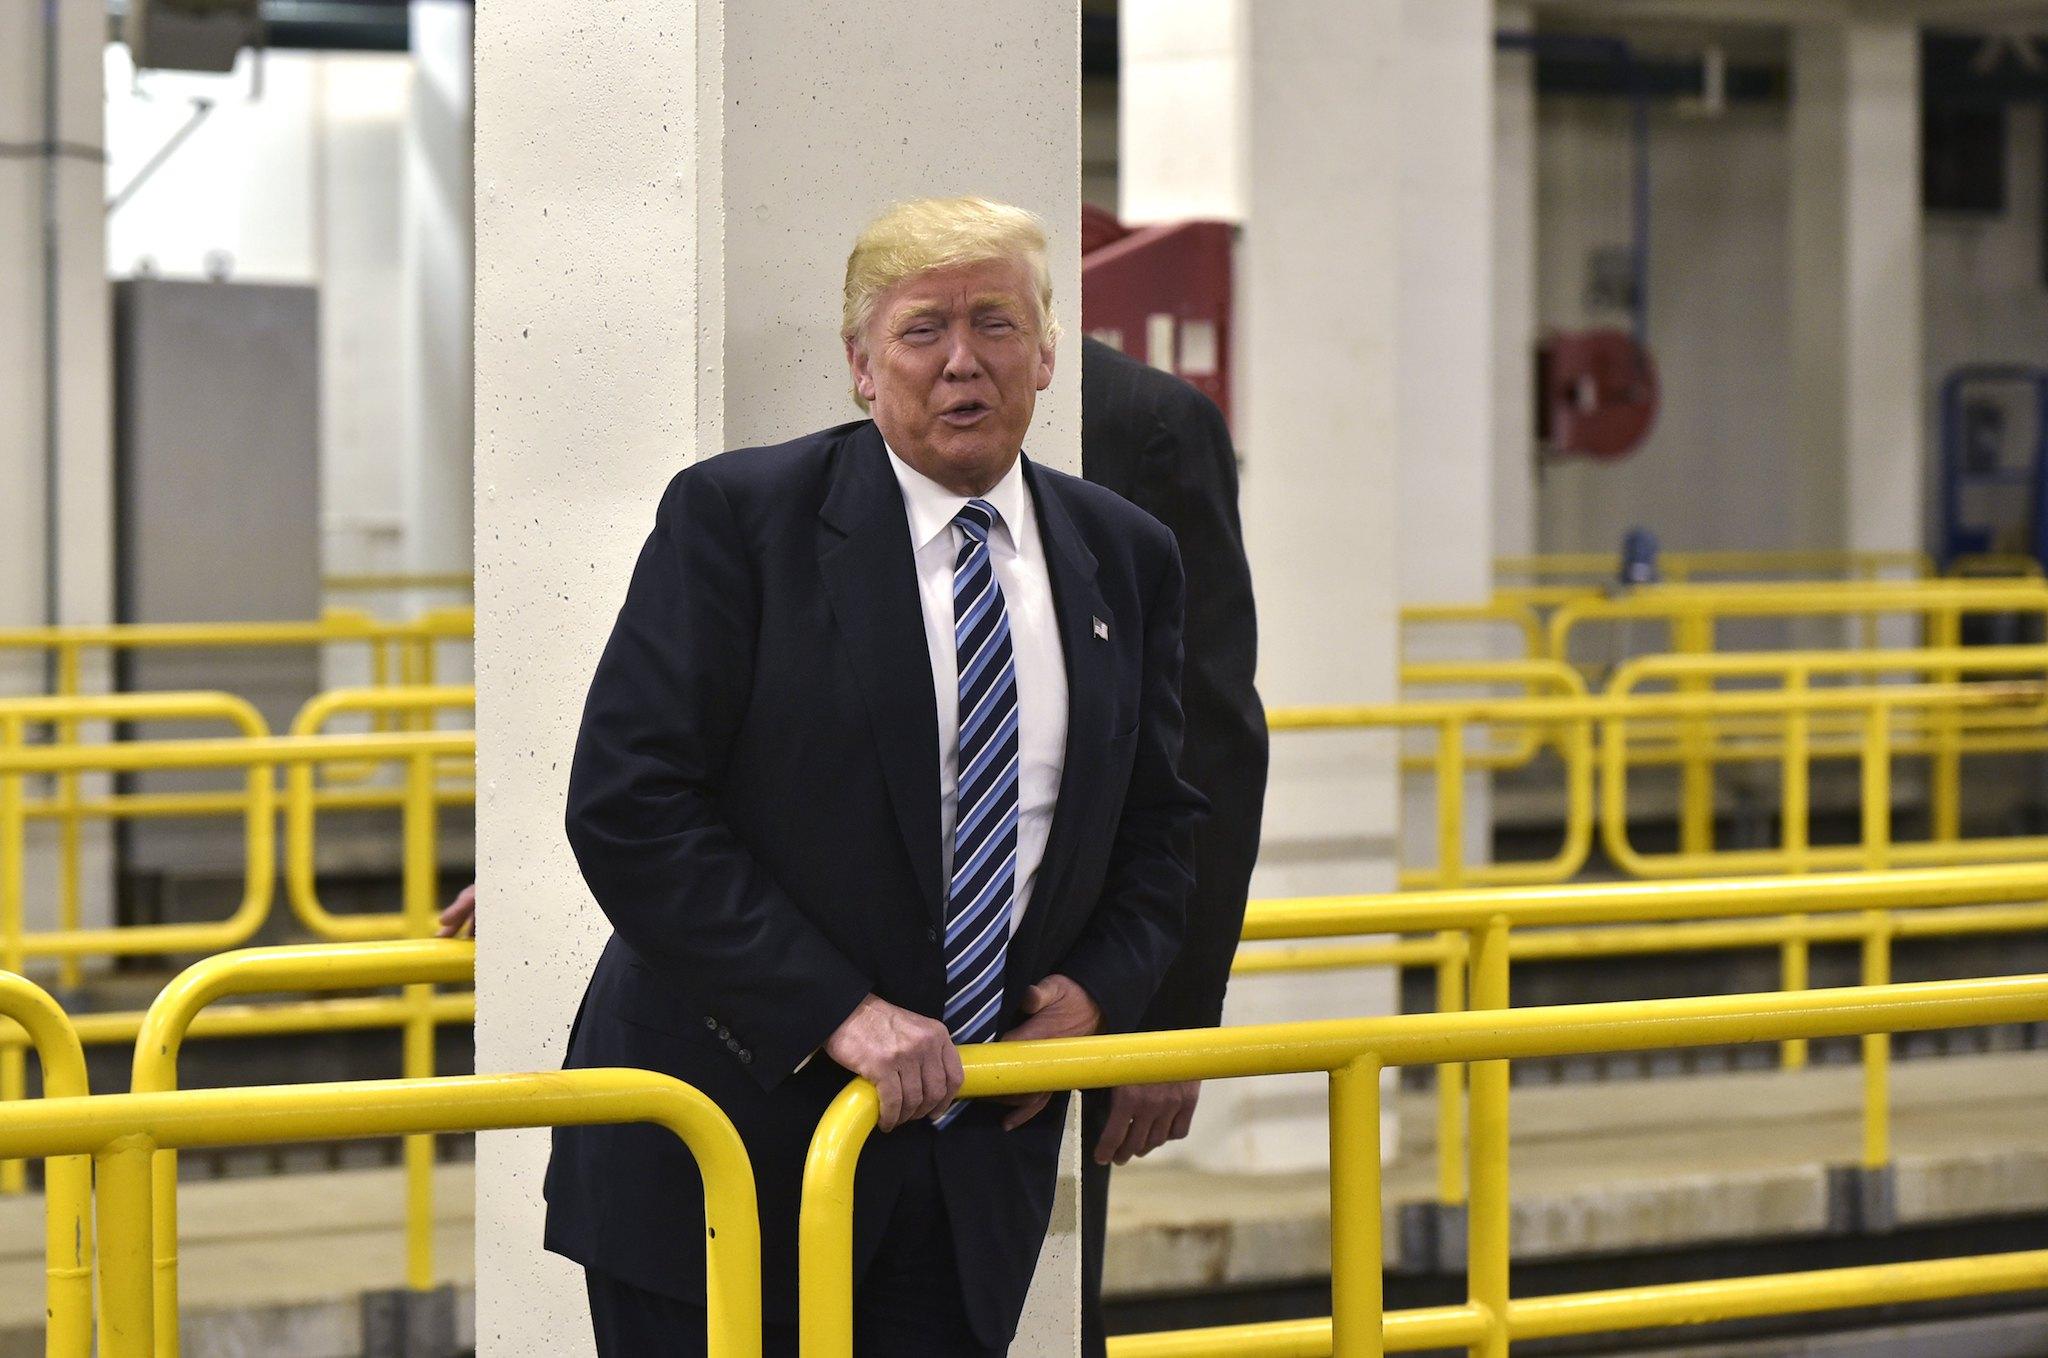 Republican presidential nominee Donald Trump tours the Flint water plant on September 14, 2016 in Flint, Michigan